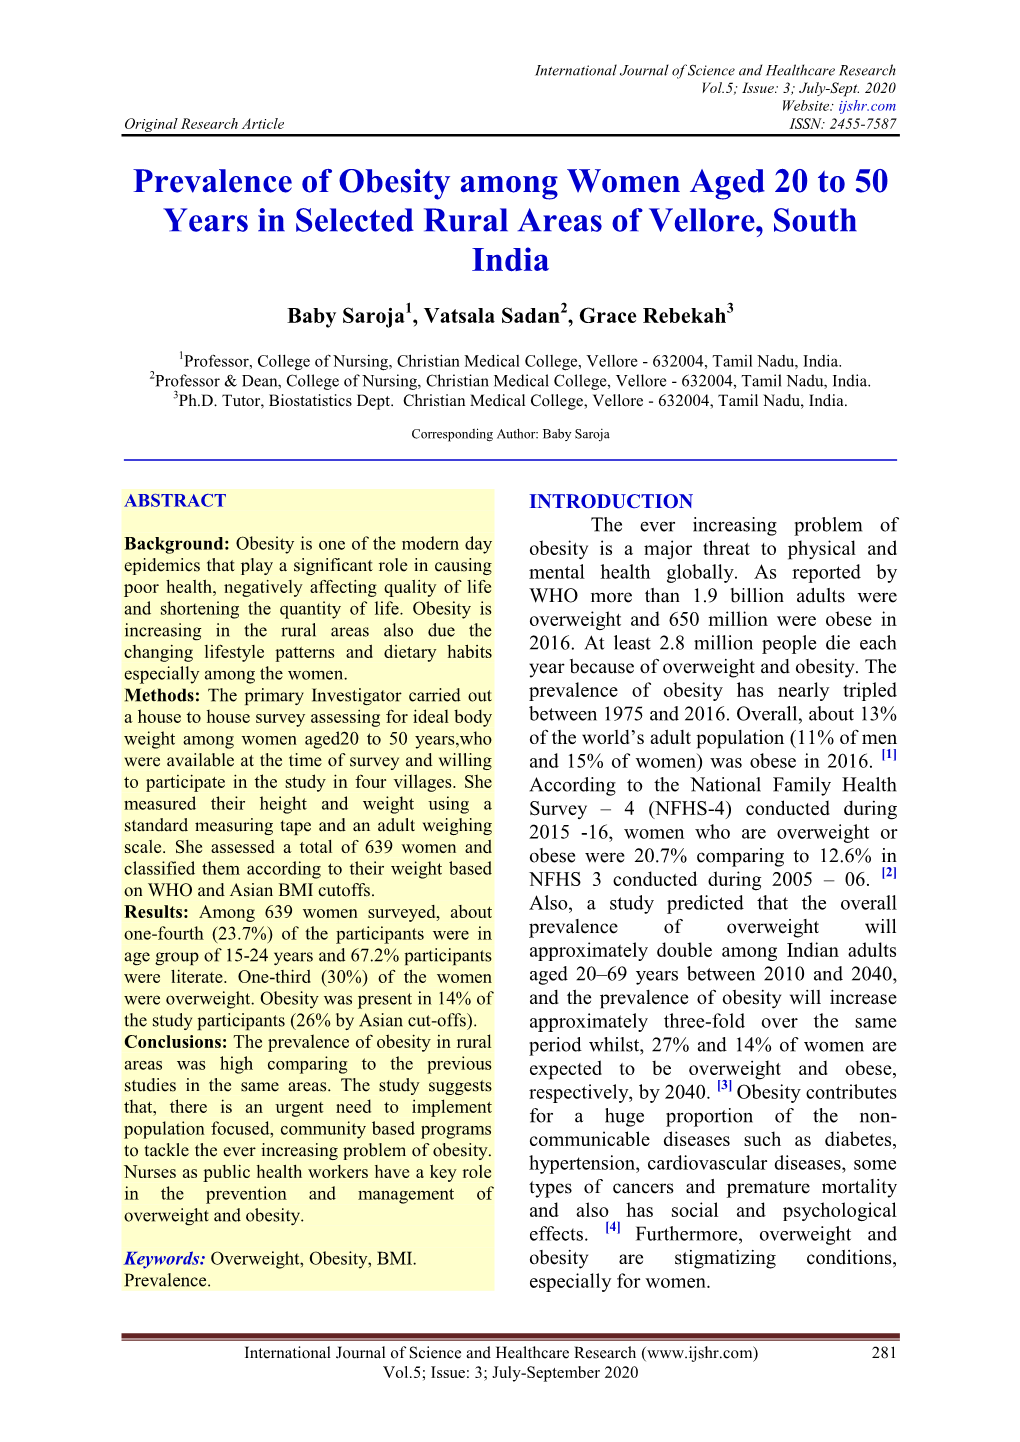 Prevalence of Obesity Among Women Aged 20 to 50 Years in Selected Rural Areas of Vellore, South India